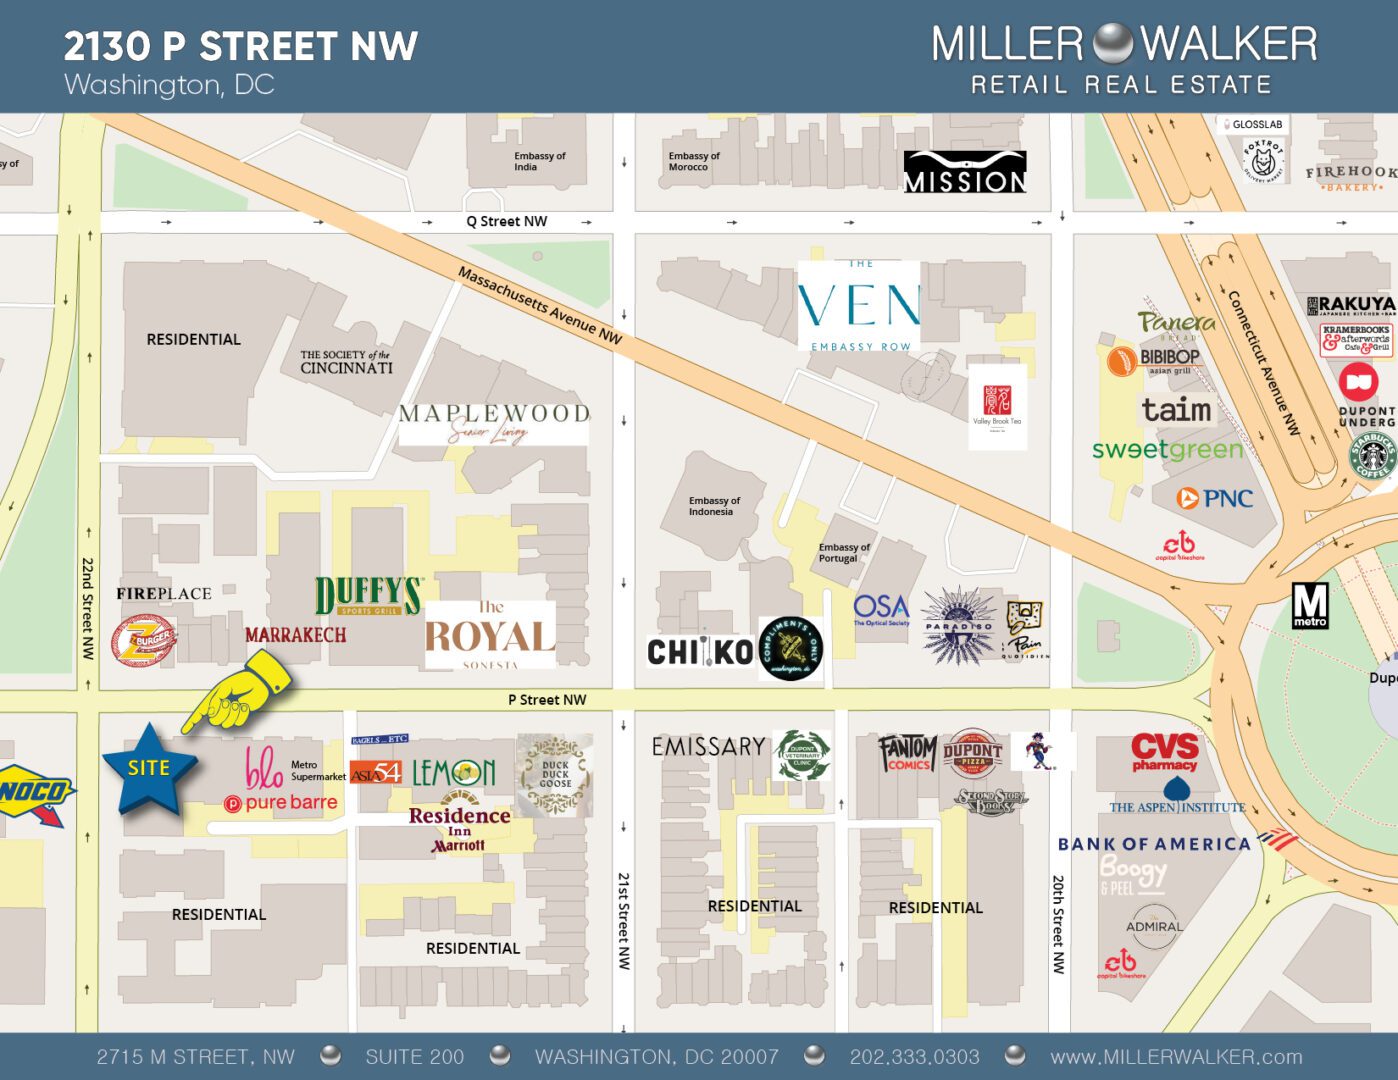 Restaurant and Retail Space for Lease DC - 2130 P Street - Dupont Circle restaurant space for lease retail map